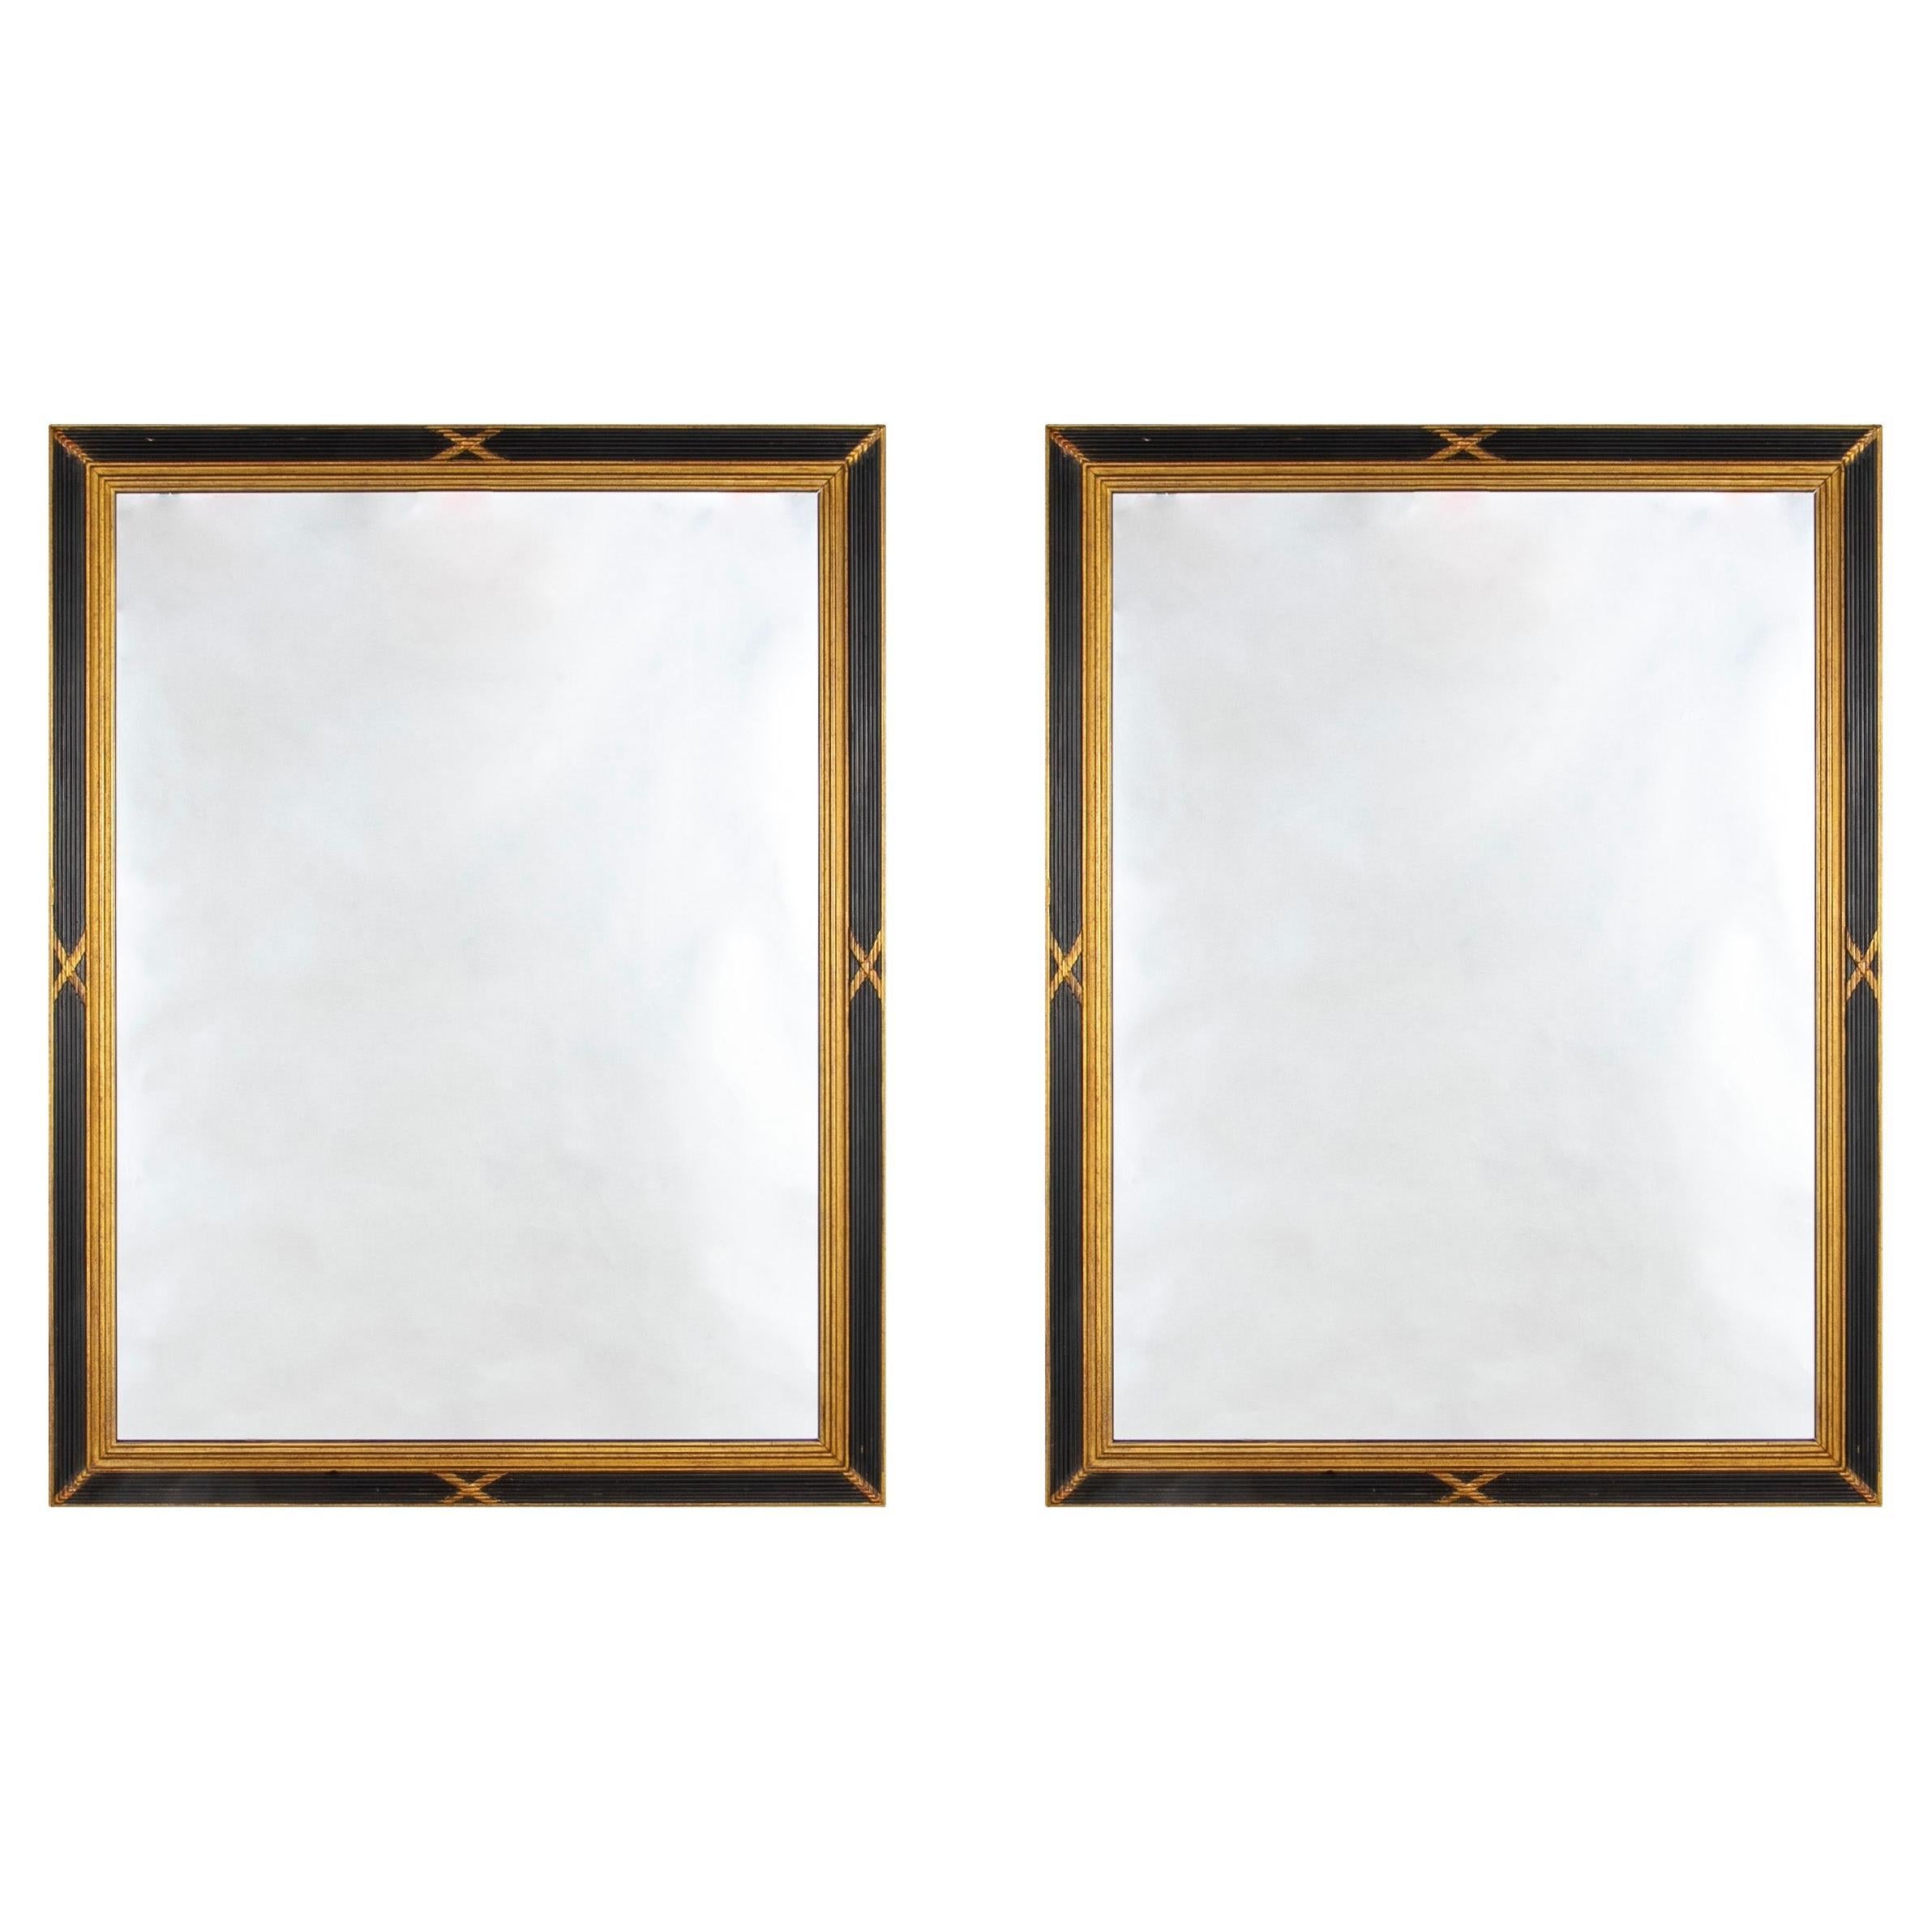 Pair Neoclassical Style Painted and Gilt Wall Mirrors, Mid 20th Century